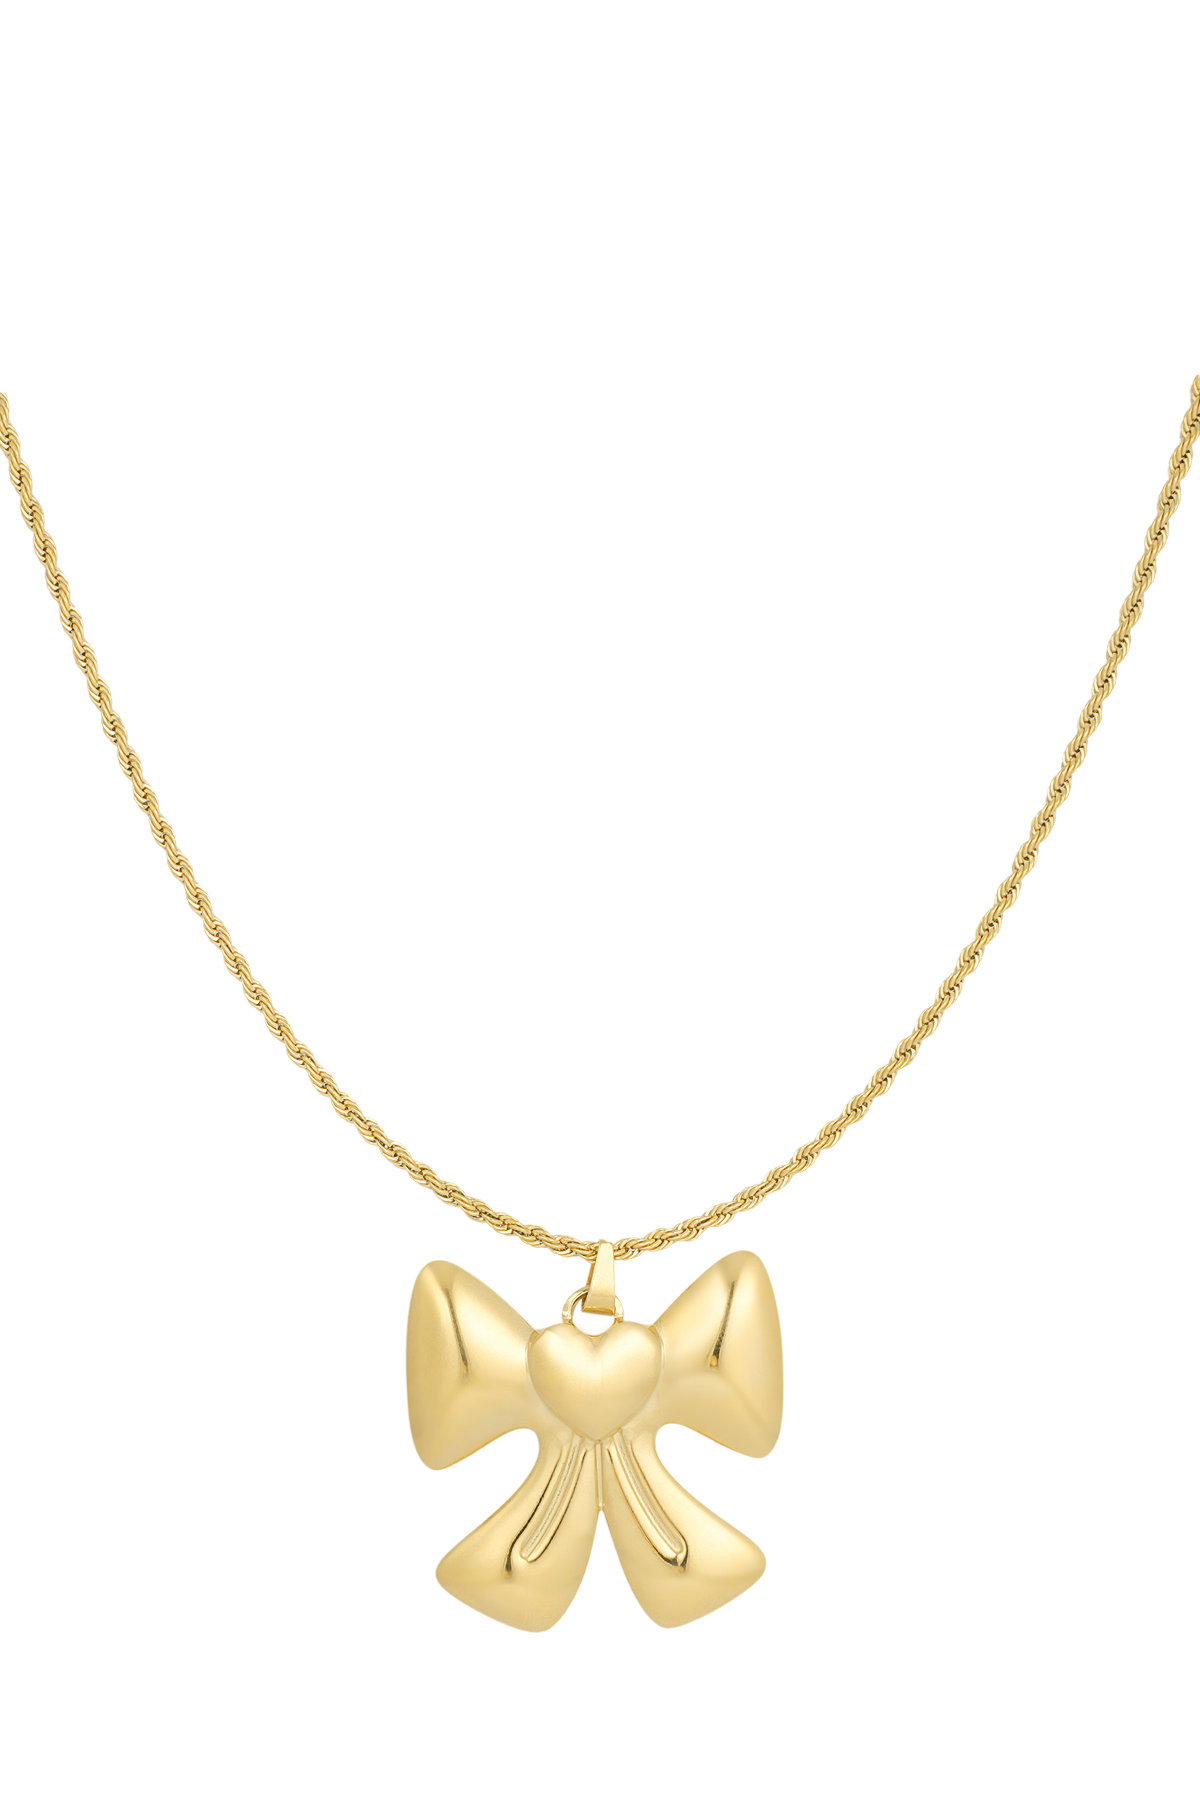 Necklace bow lover - gold